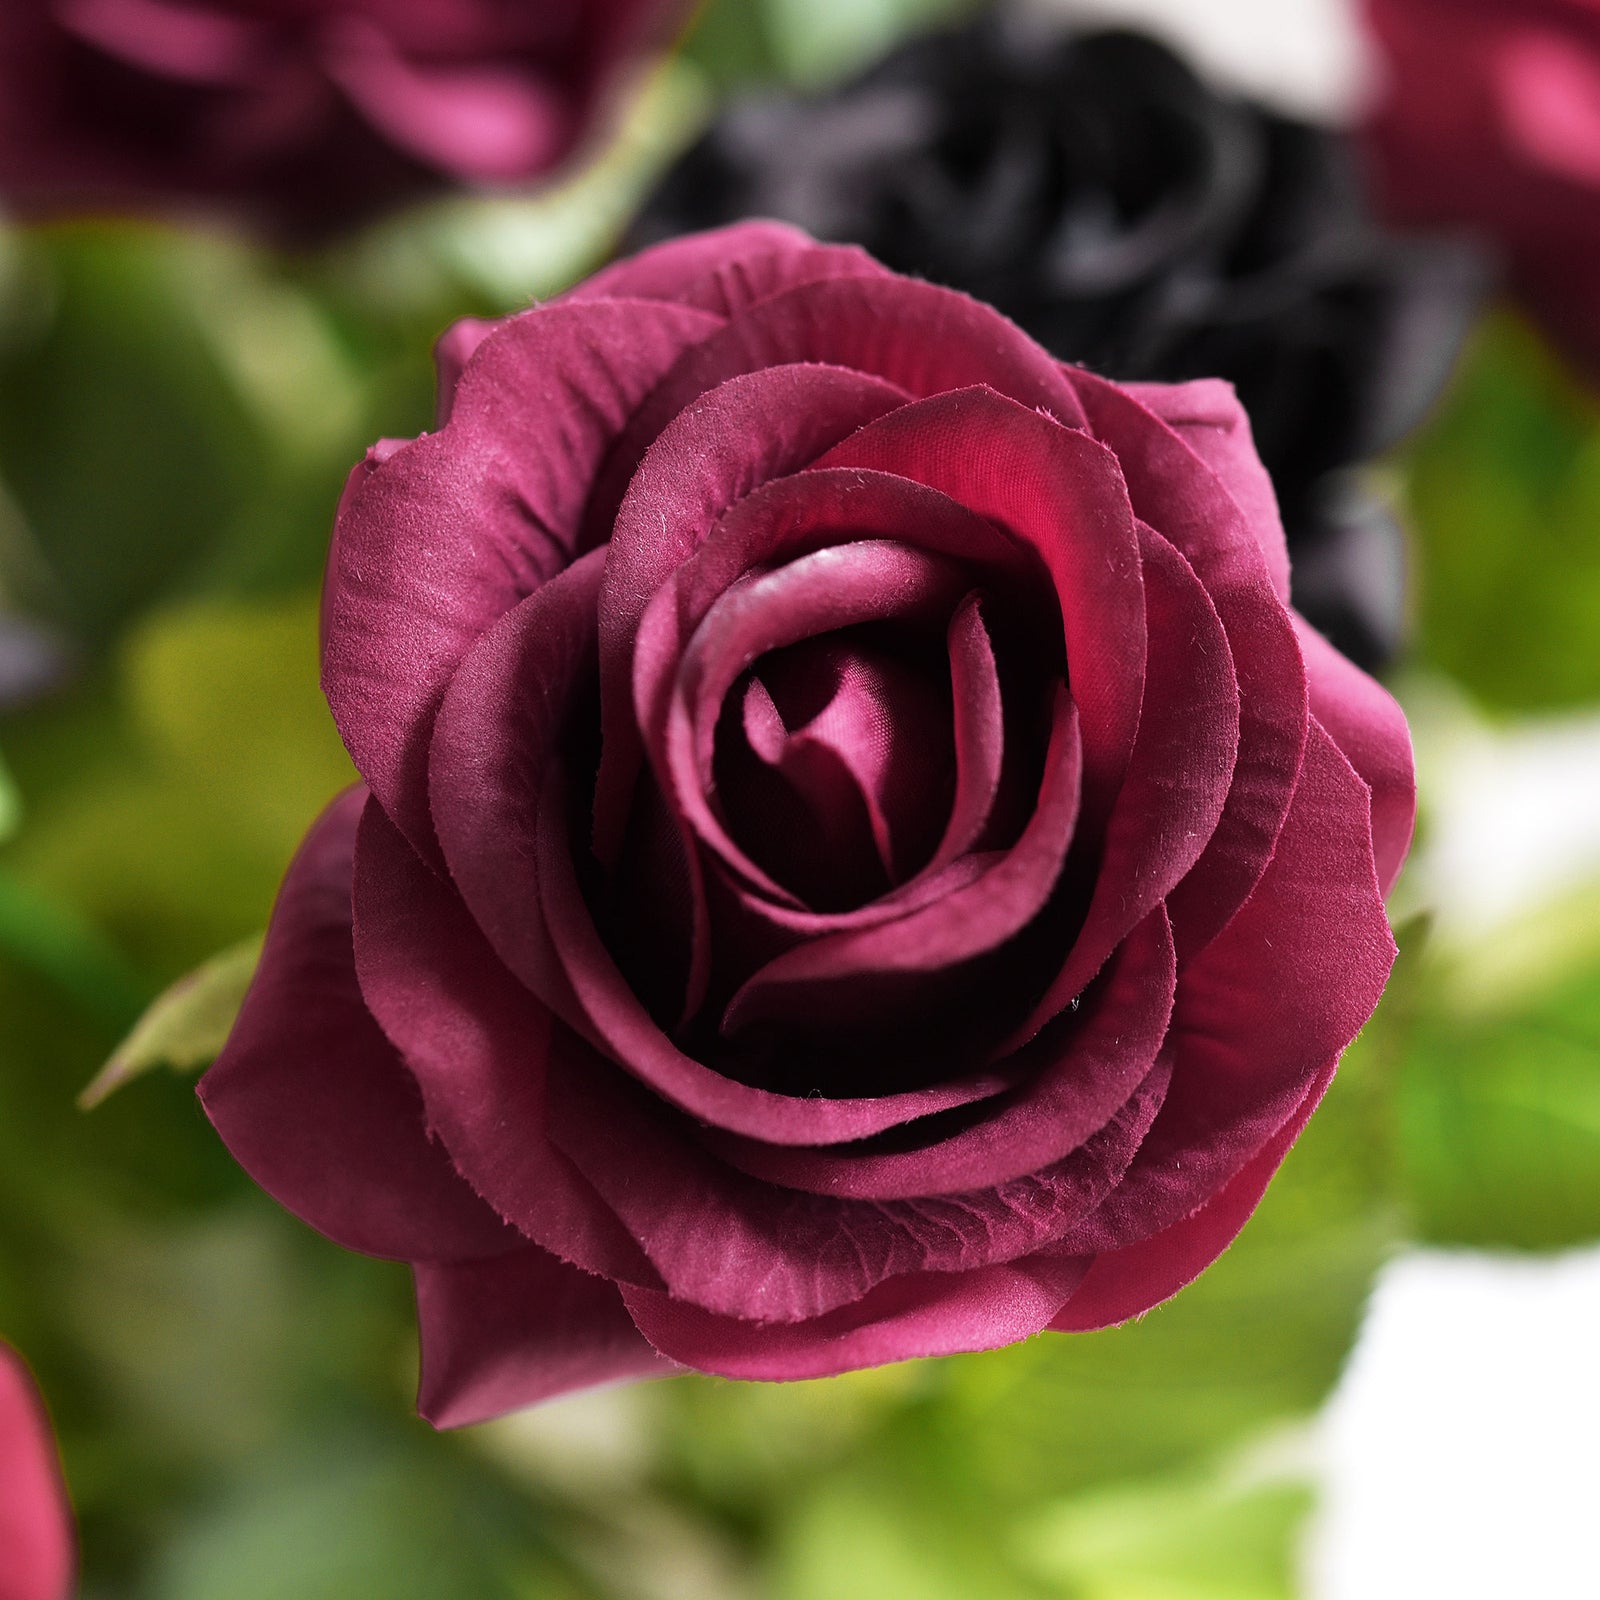 ''Midnight Gothic'' Rose Bouquet Artificial Flowers 12 Stems